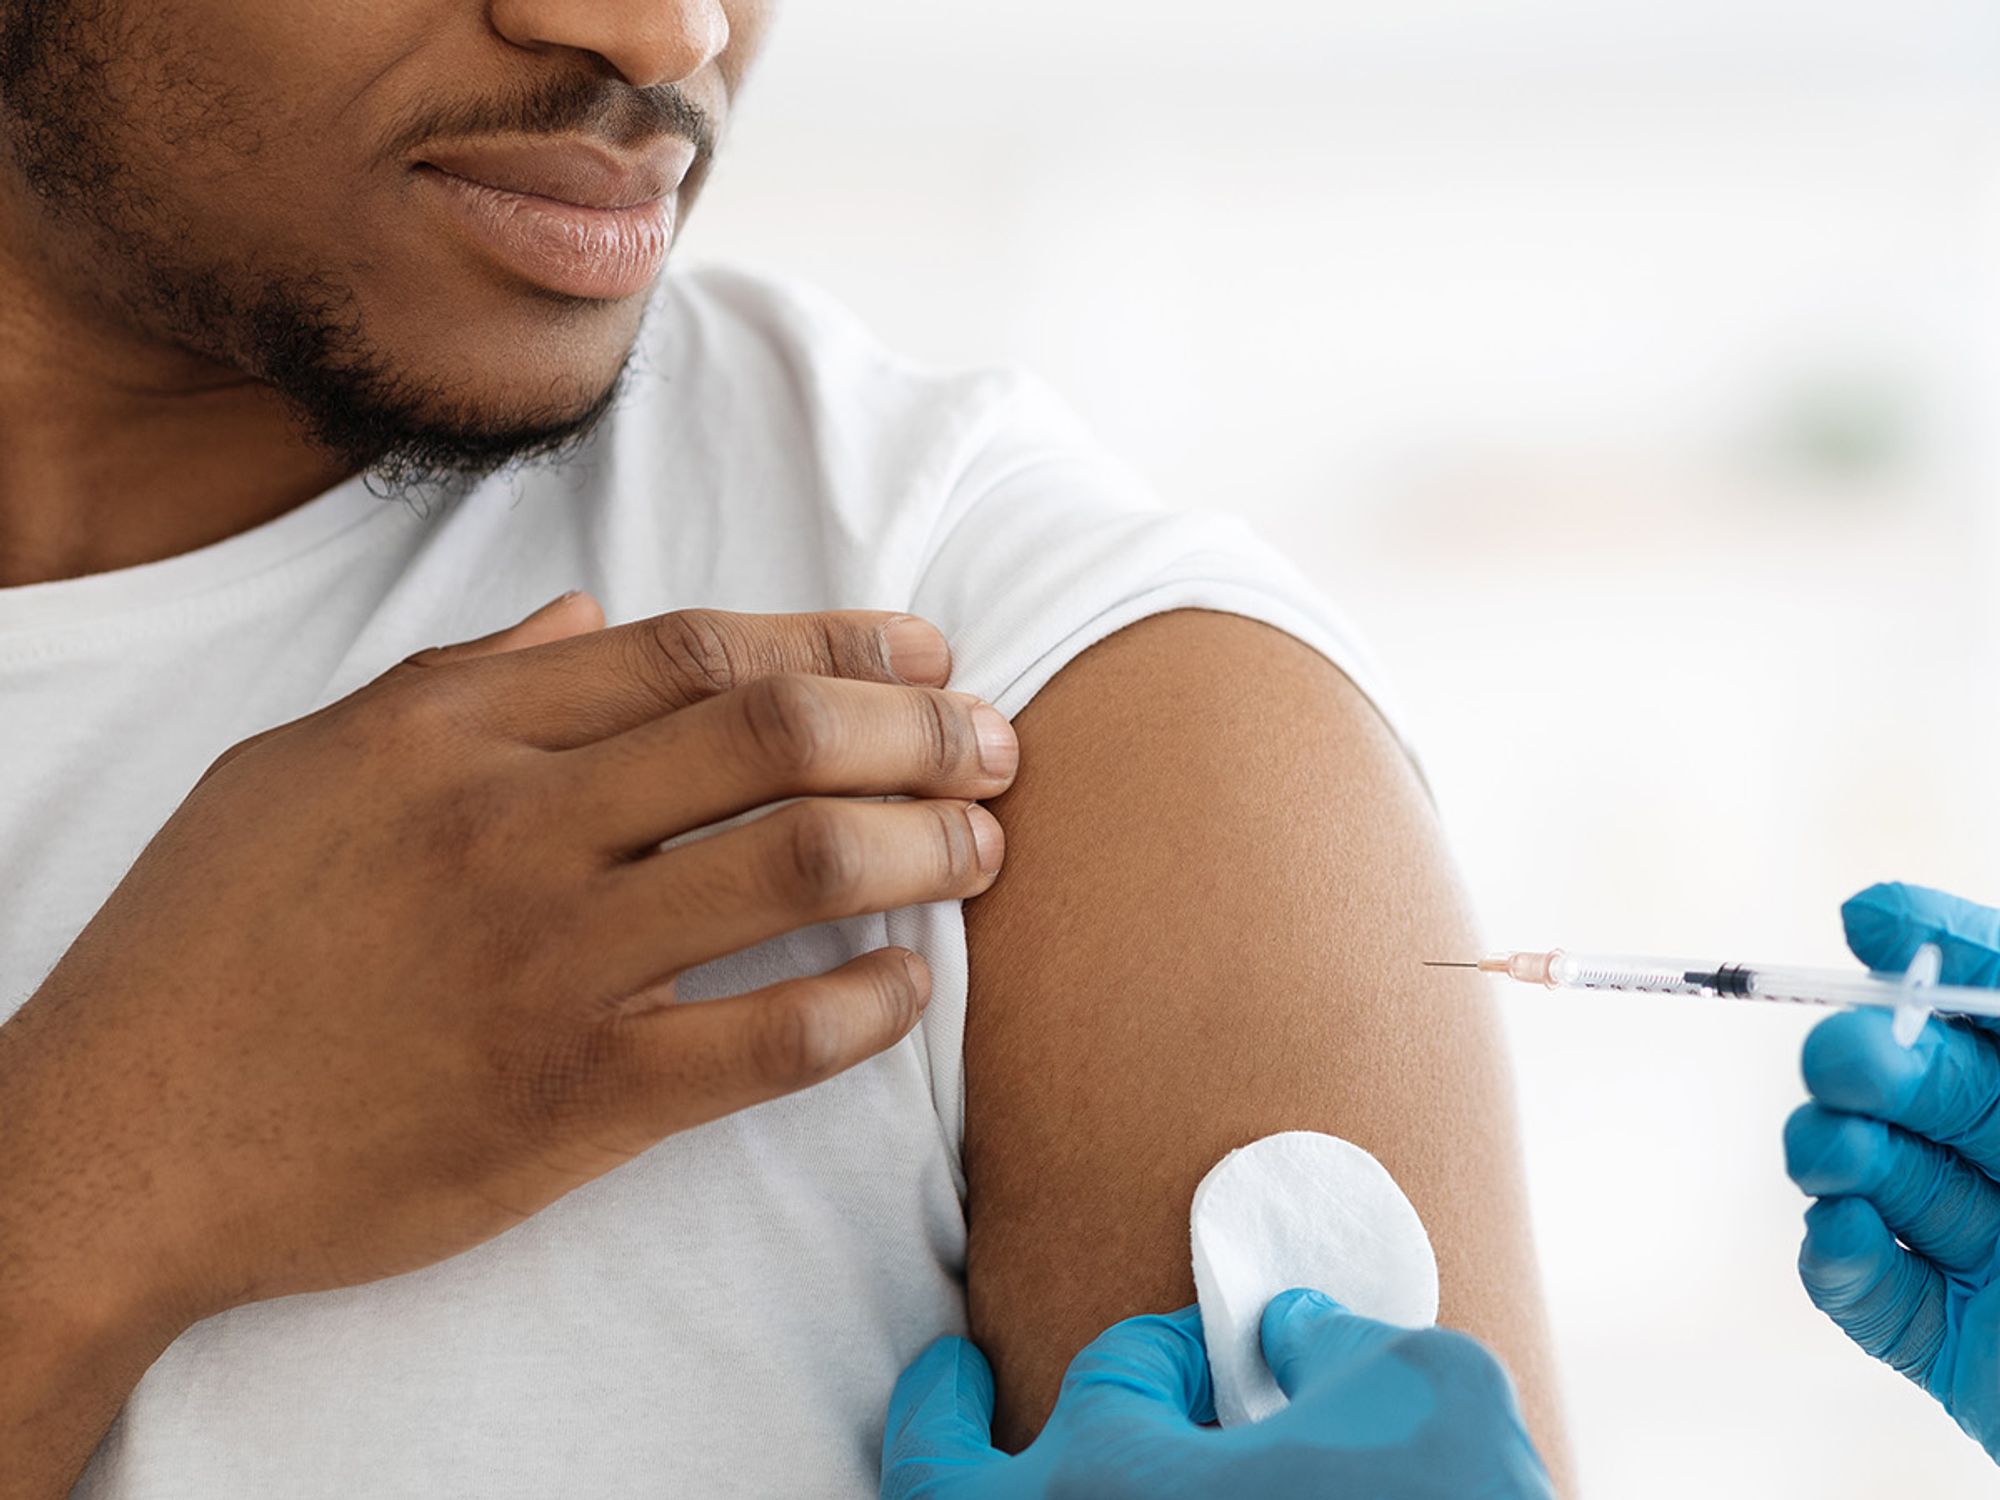 Consent and hepatitis B vaccination